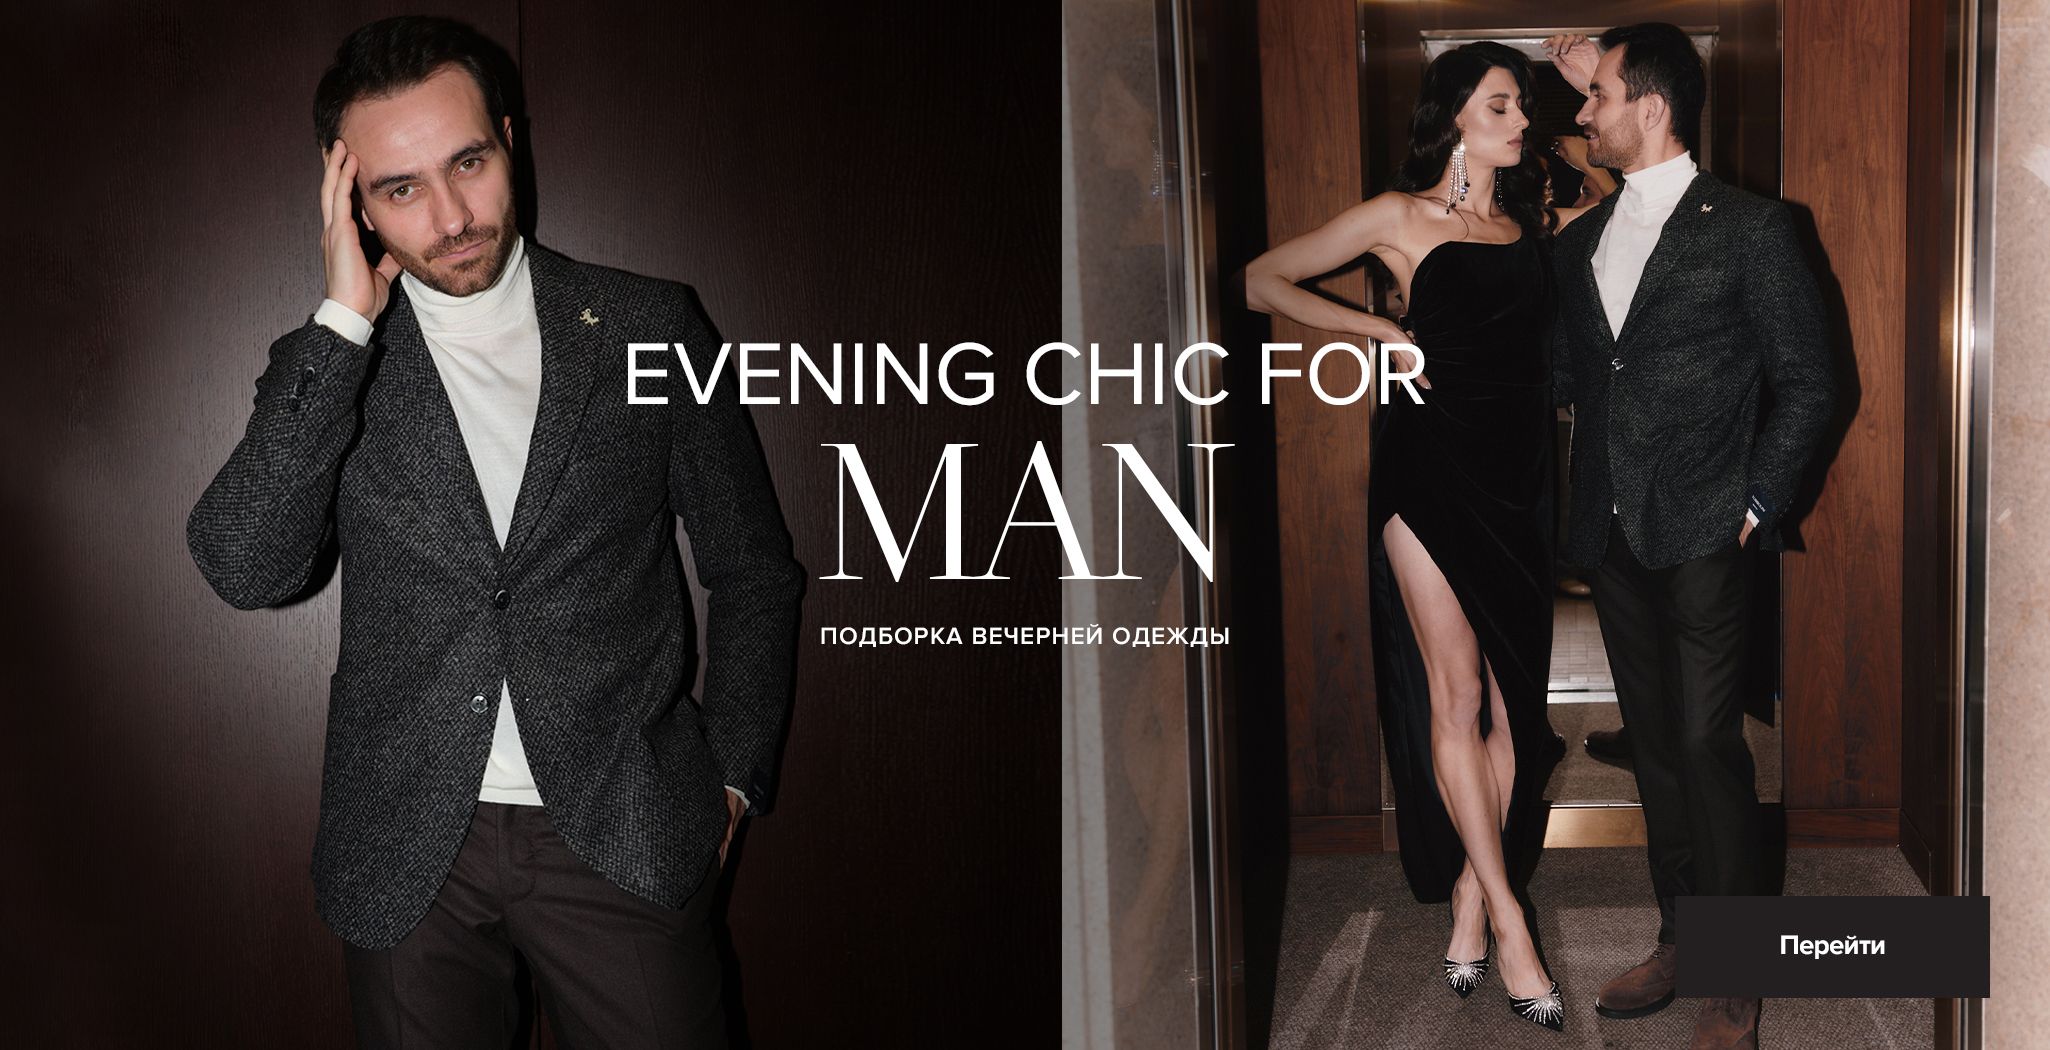 EVENING CHIC FOR MAN